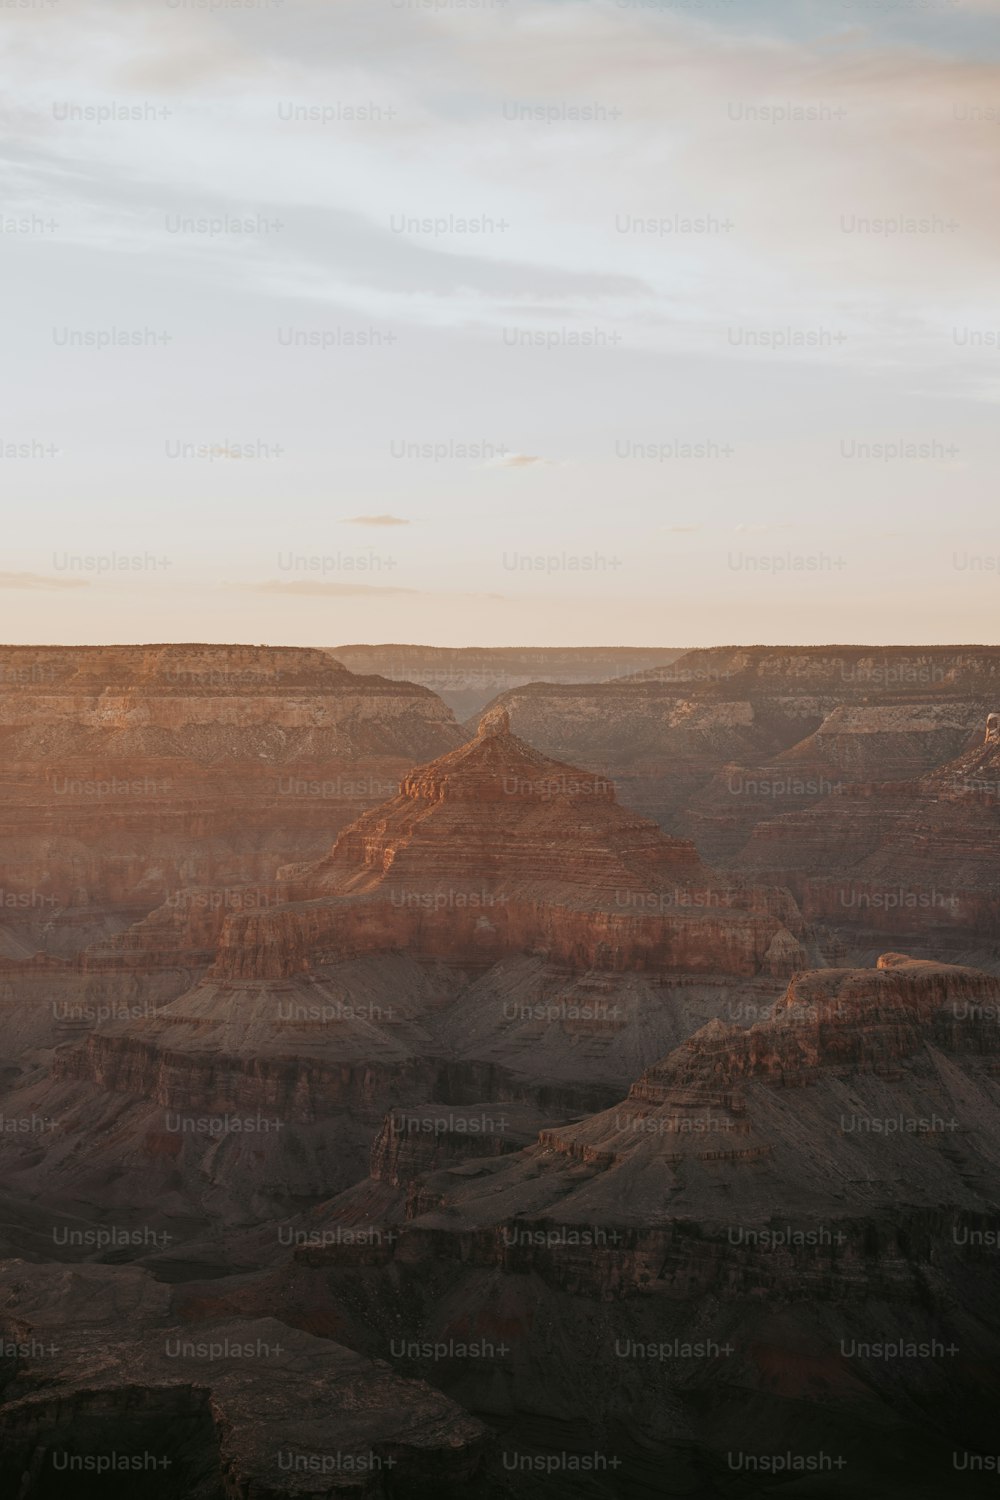 a view of the grand canyon at sunset